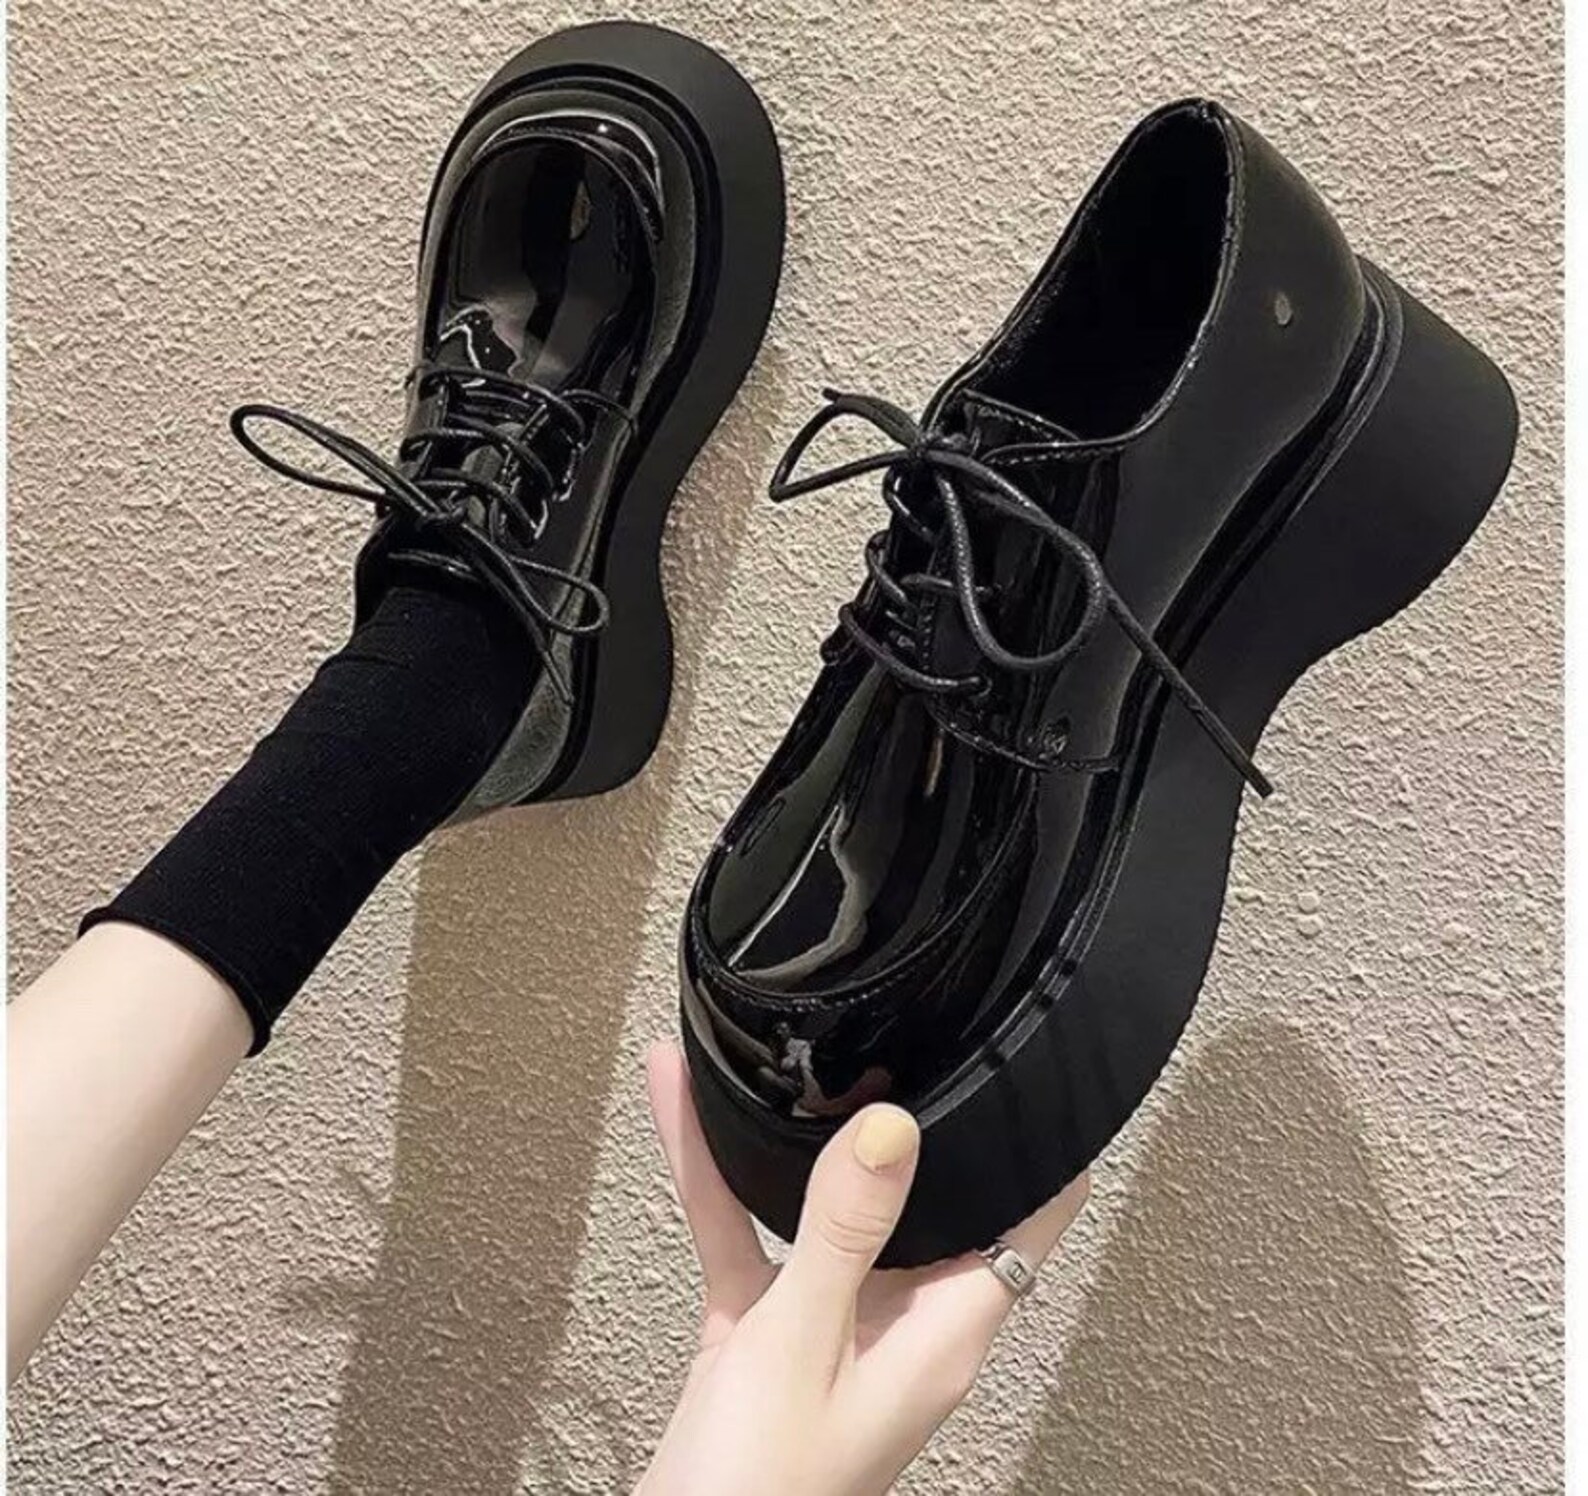 Sneakers chunky school shoes black thick soles platform | Etsy